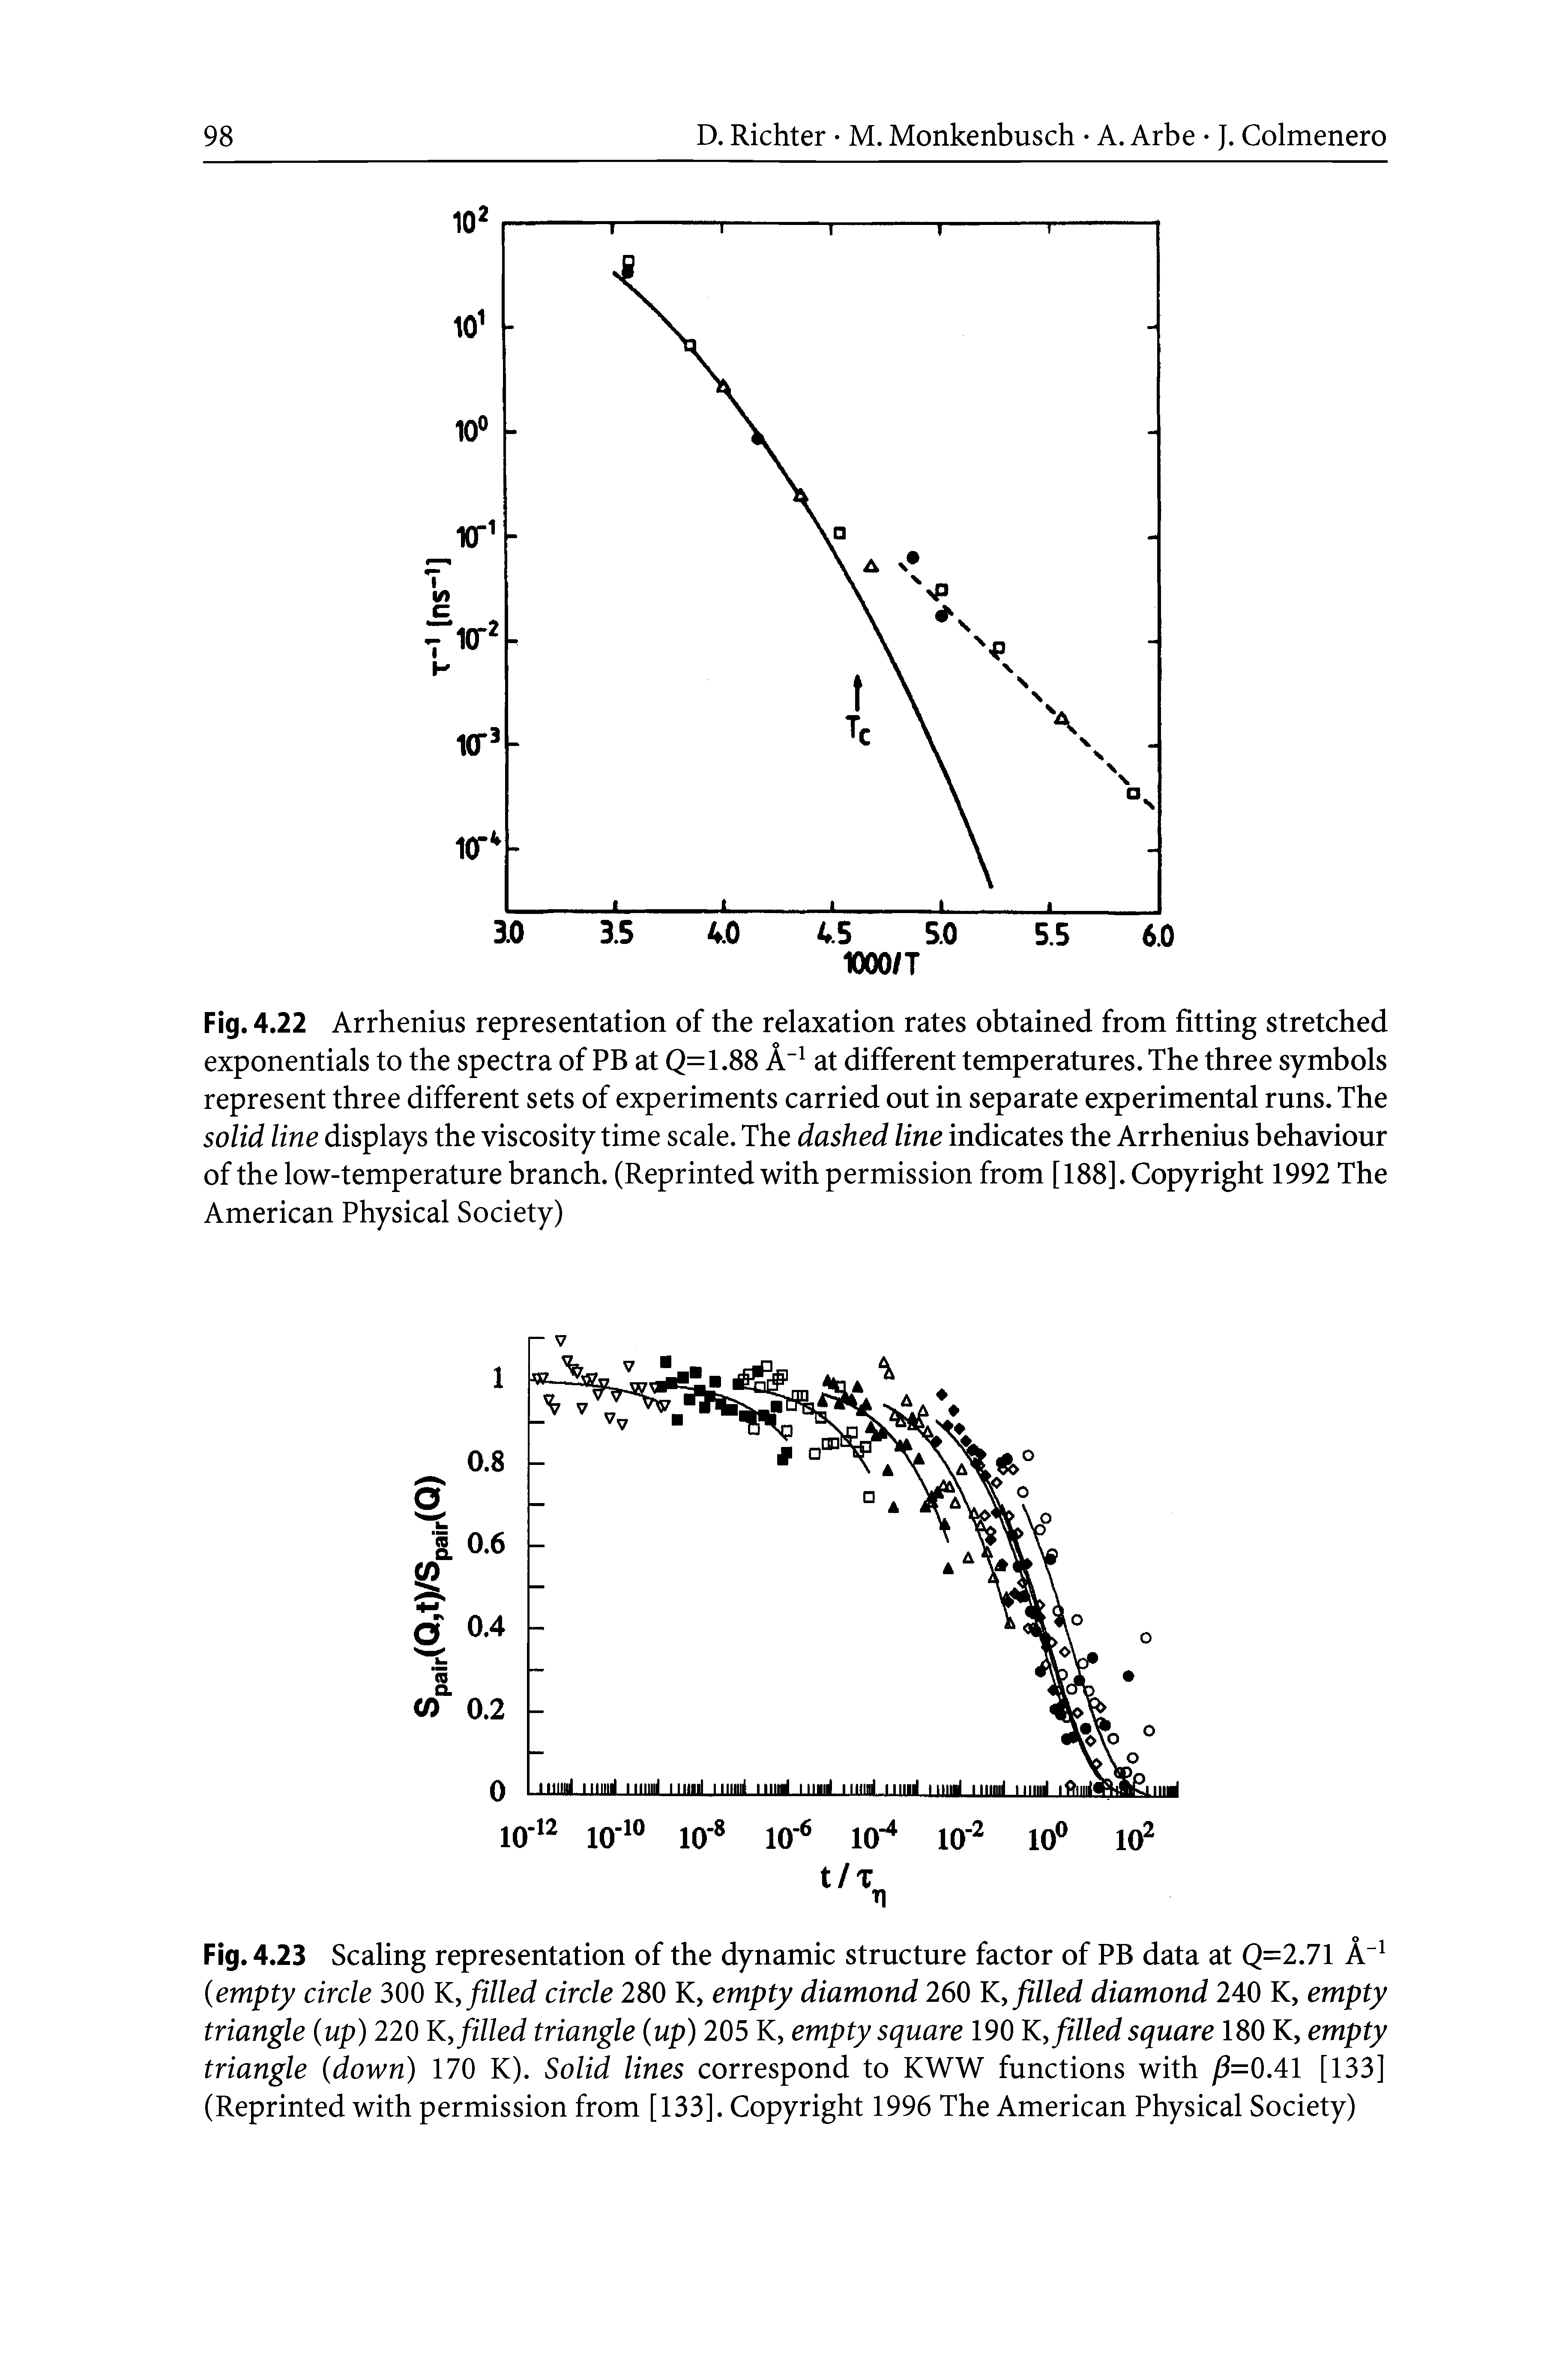 Fig. 4.22 Arrhenius representation of the relaxation rates obtained from fitting stretched exponentials to the spectra of PB at Q=1.88 A" at different temperatures. The three symbols represent three different sets of experiments carried out in separate experimental runs. The solid line displays the viscosity time scale. The dashed line indicates the Arrhenius behaviour of the low-temperature branch. (Reprinted with permission from [188]. Copyright 1992 The American Physical Society)...